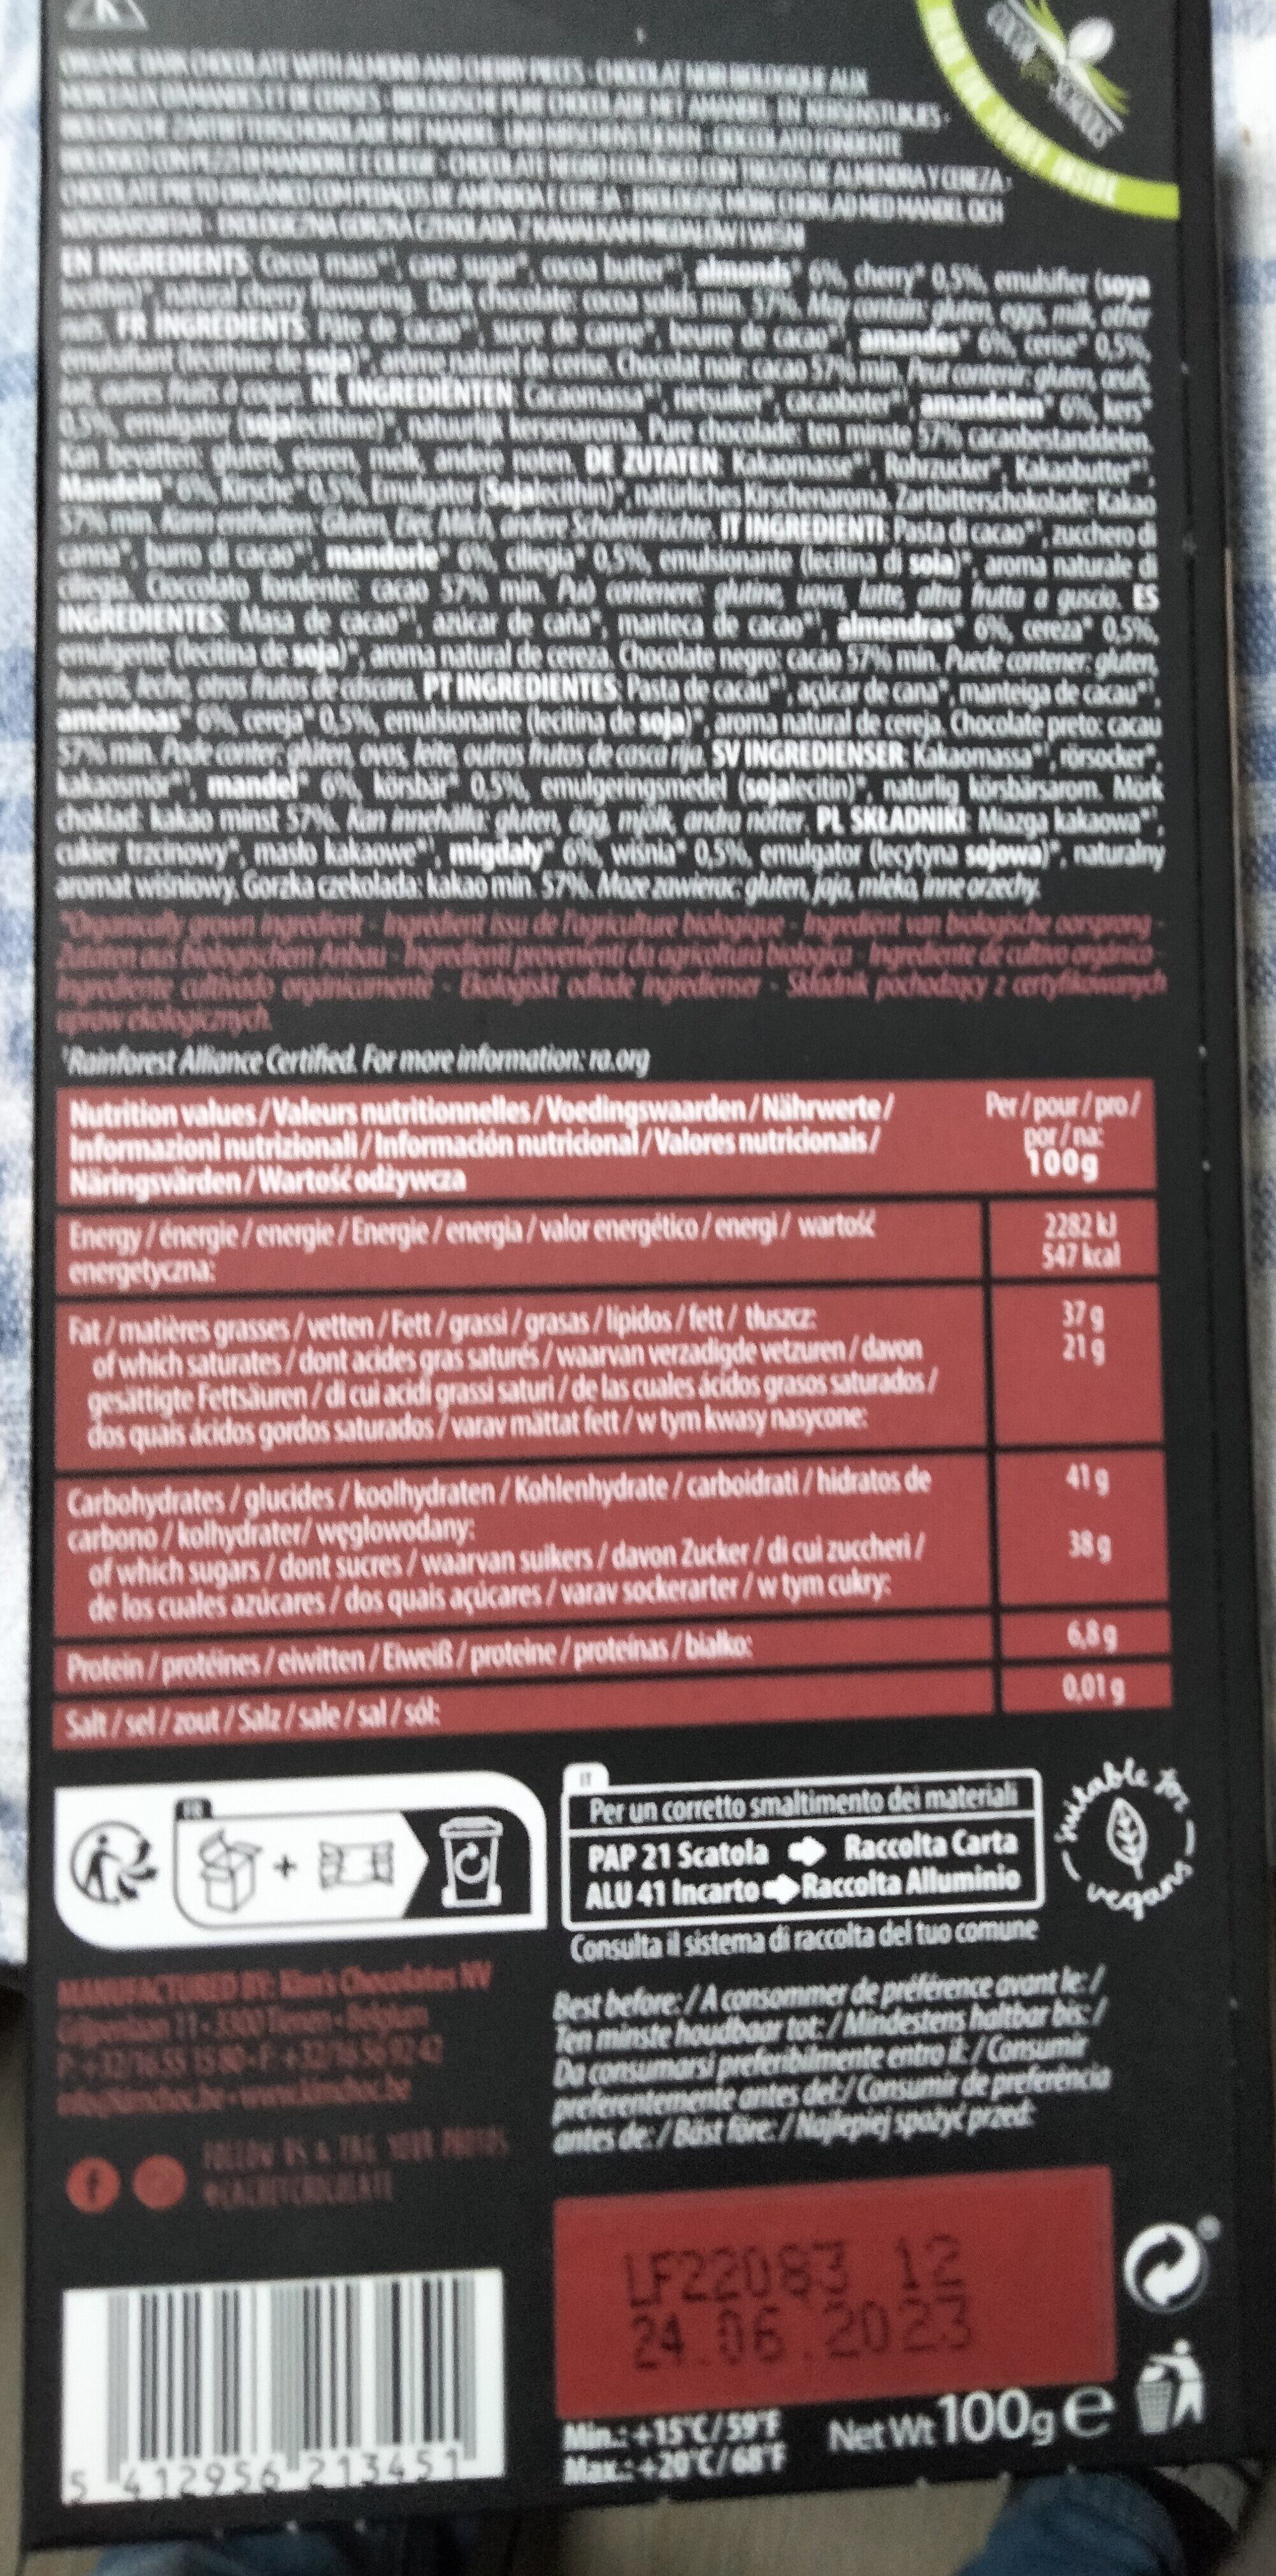 Cherries & almond 57% cacao dark chocolate - Instruction de recyclage et/ou informations d'emballage